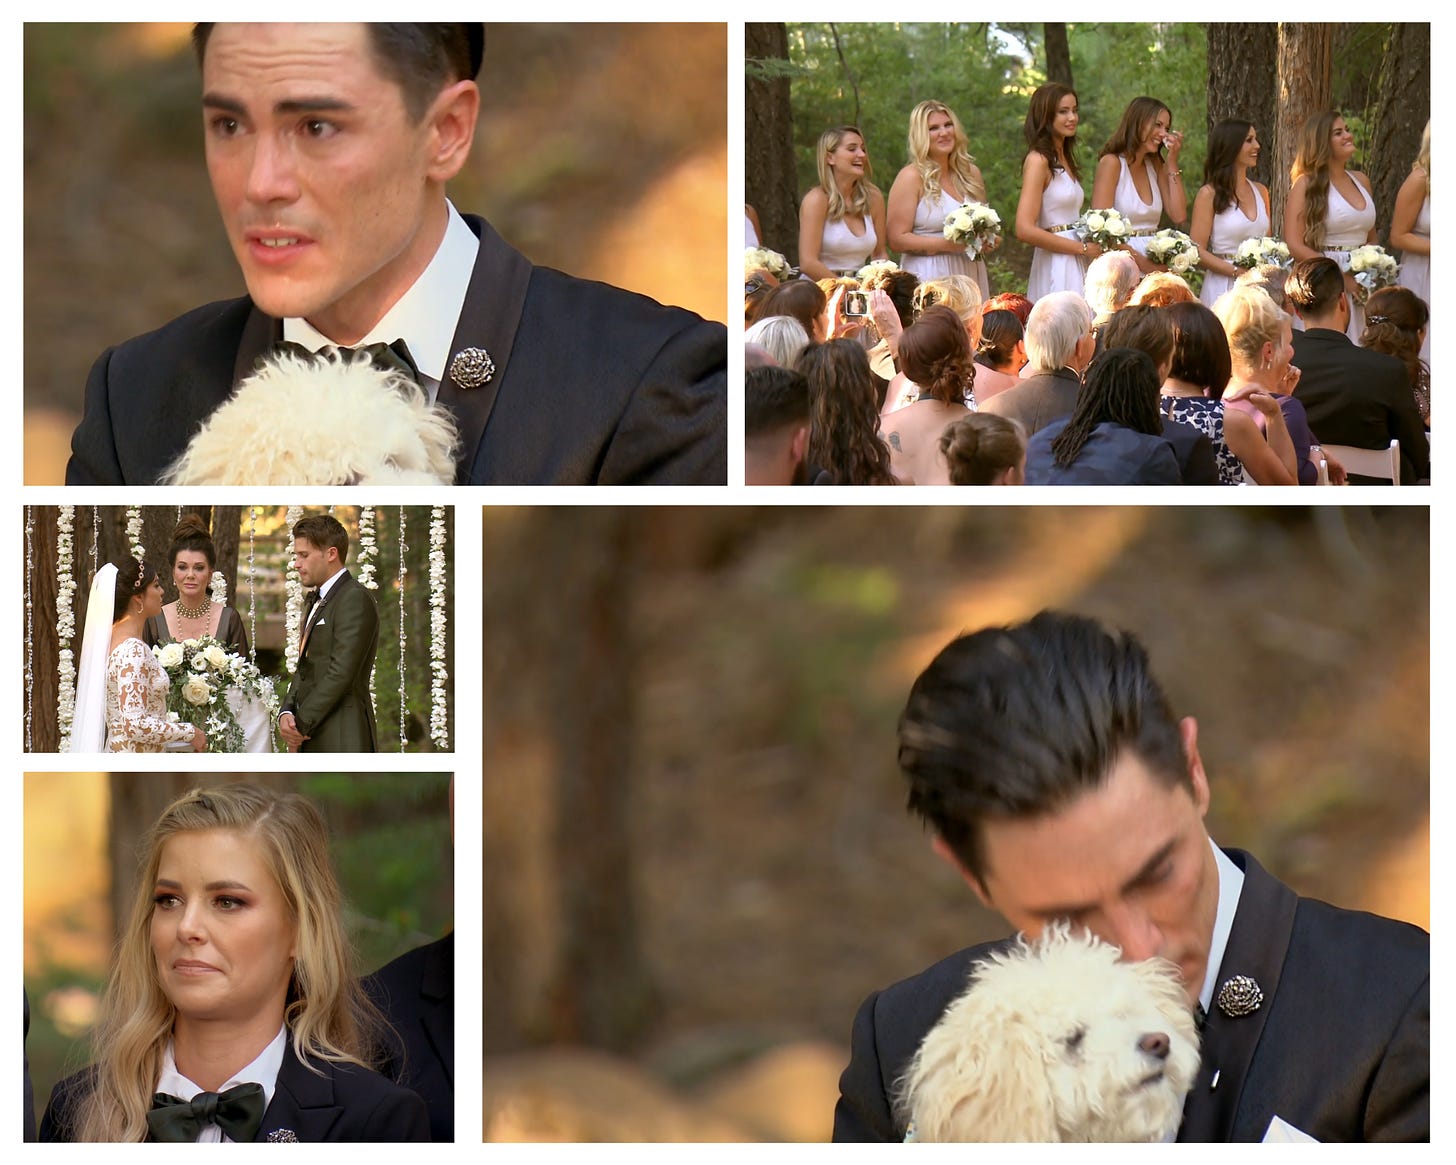 A collection of images from Tom and Katie's wedding. Top left: Tom Sandoval cries while hilding Butters the dog, top right: a line of bidesmaids laugh, bottom right: Tom Sandoval wipes his tears on Butters' fur, buttom left: Ariana smiles, middle left: Lisa Vanderpump officiates with Tom and Katie on either side. 